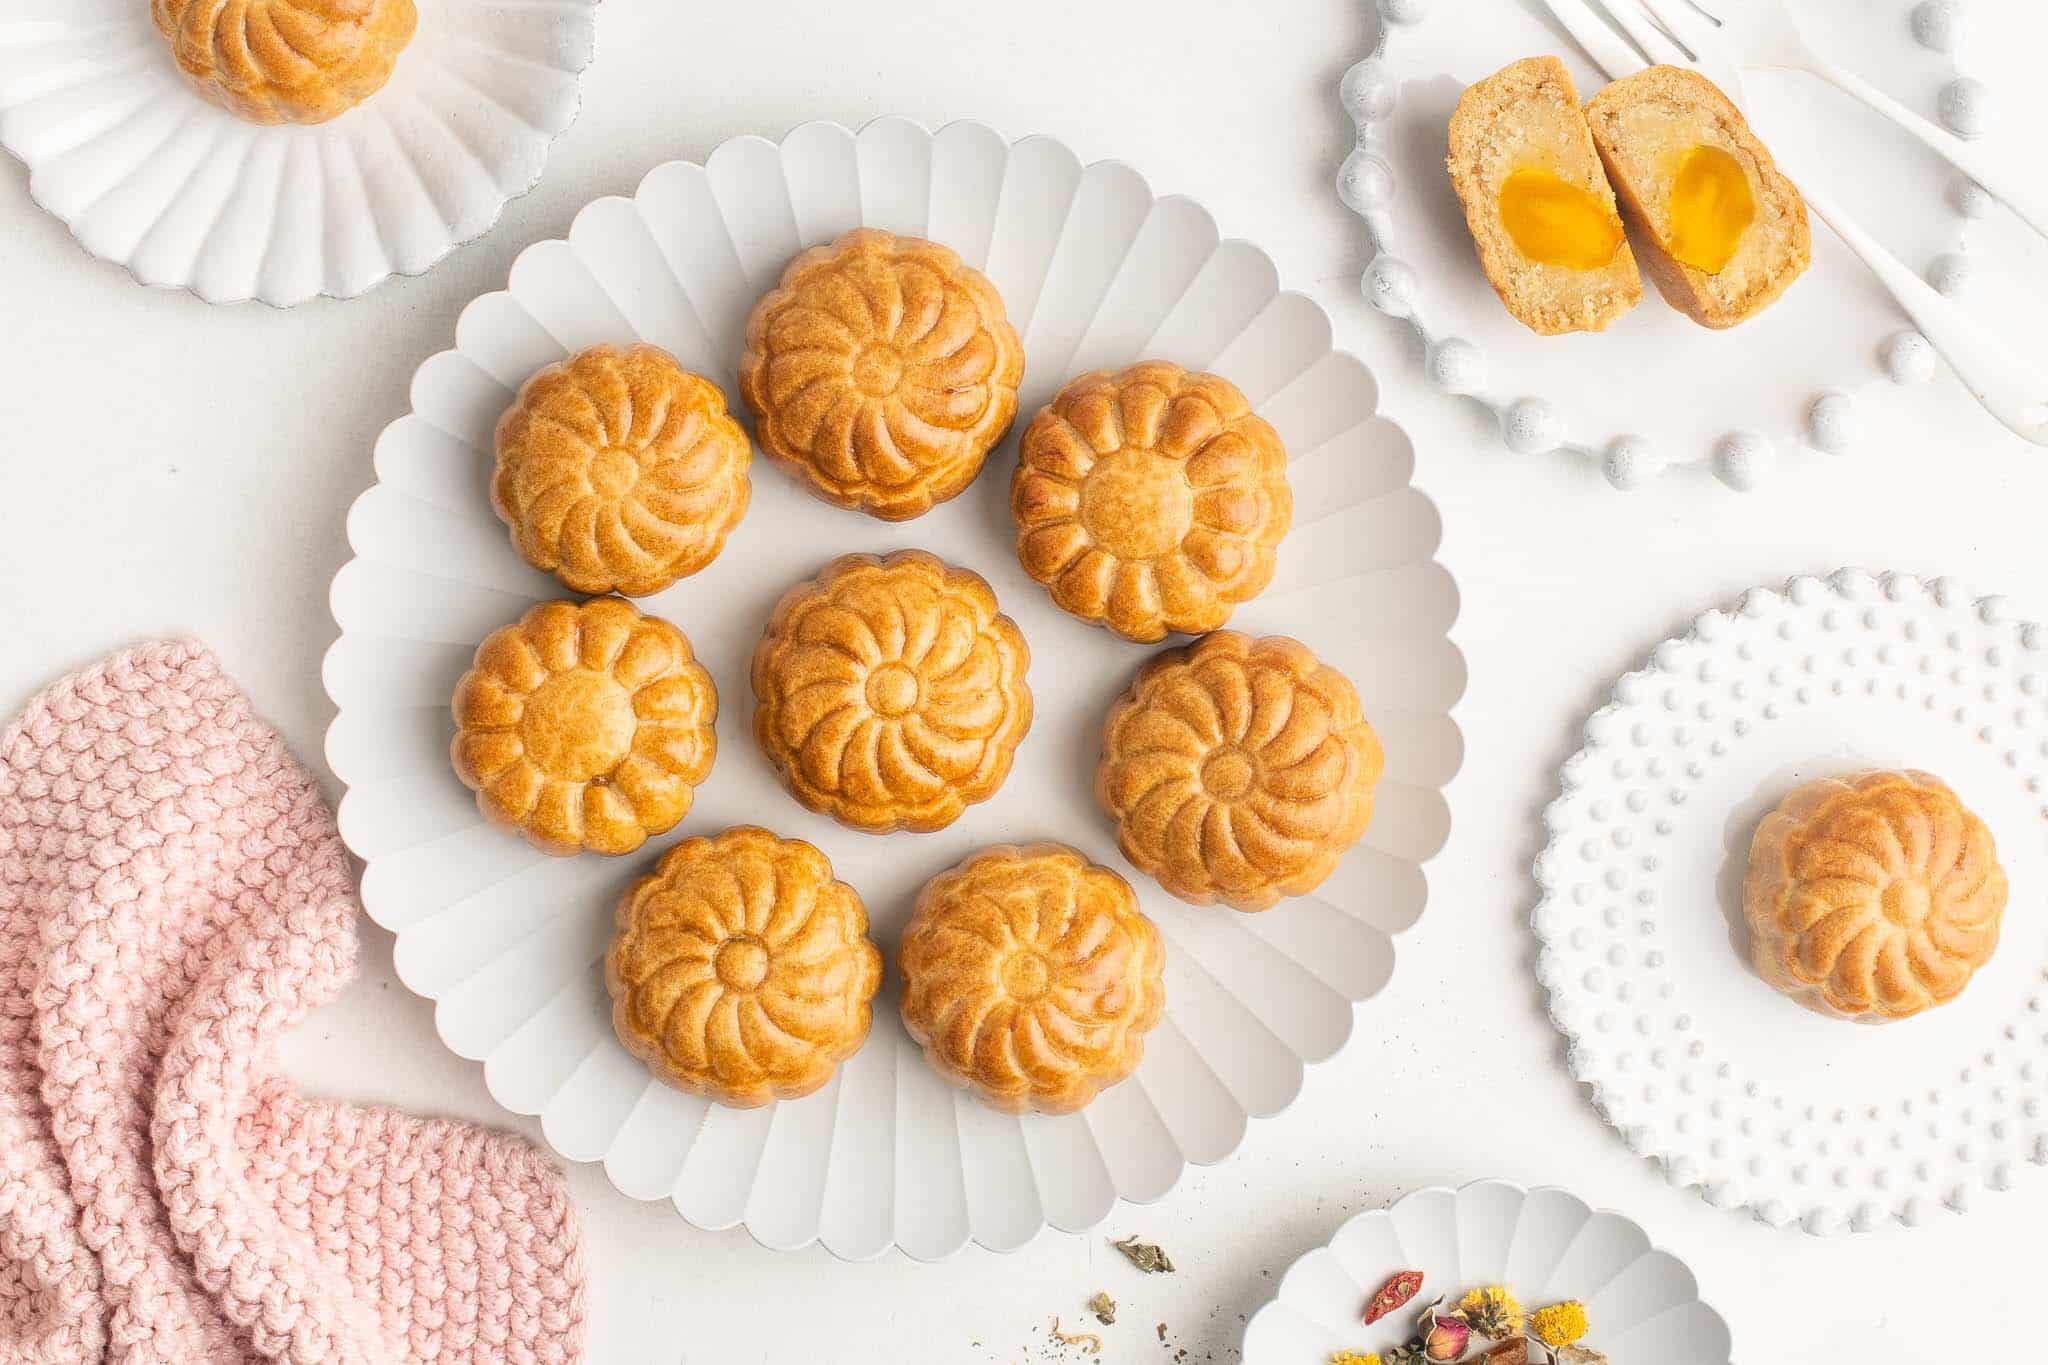 mooncakes with lotus seed paste and salted egg yolks on white plate